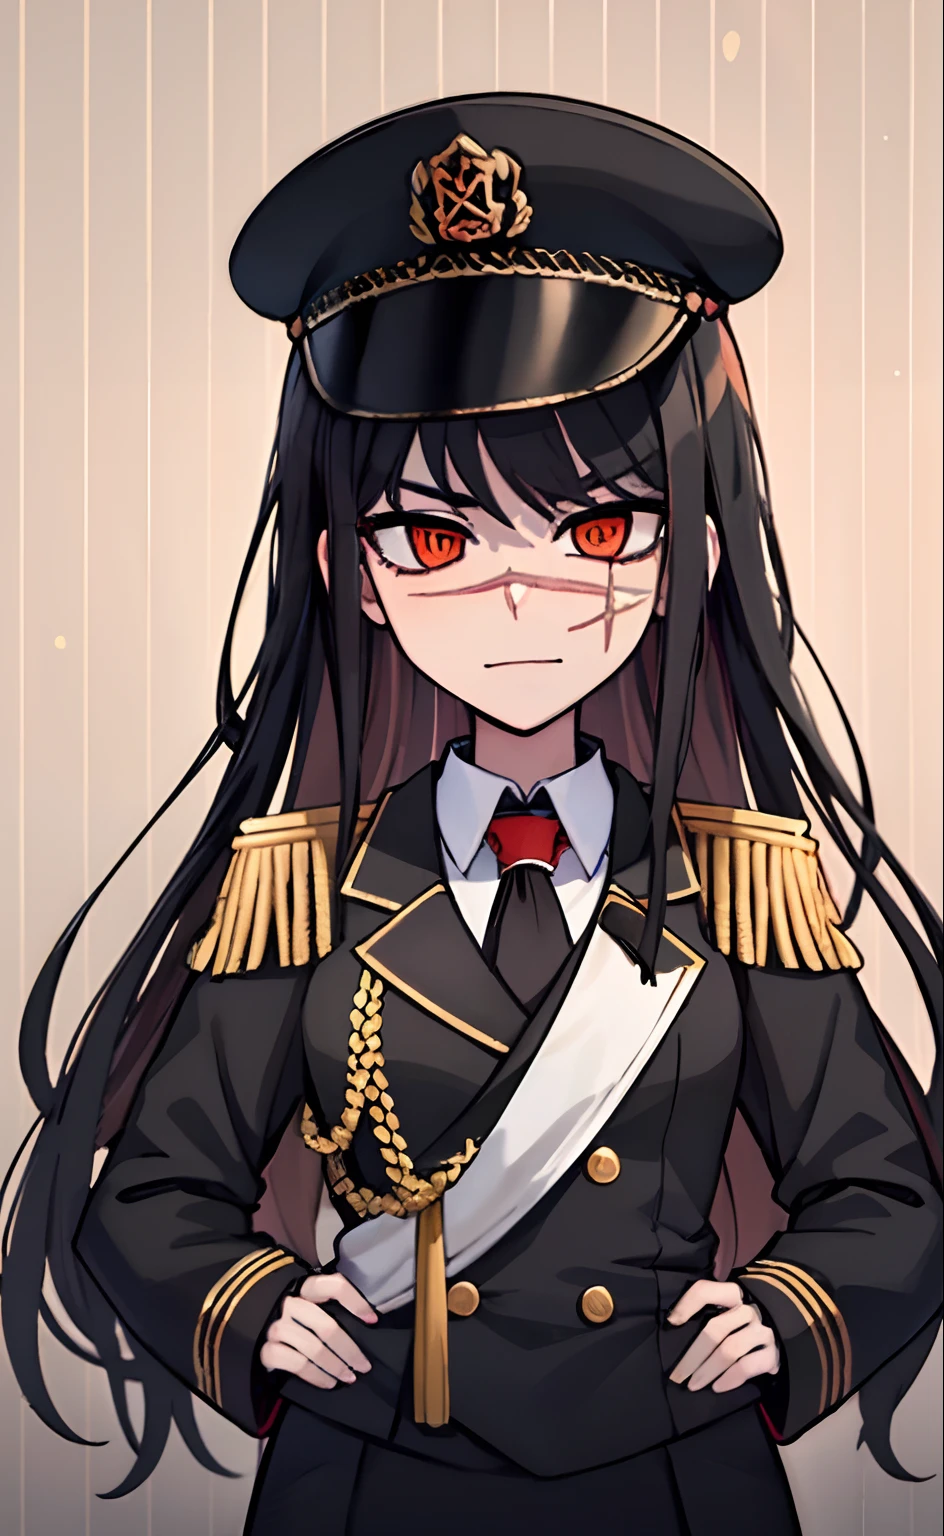 (masterpiece, best quality: 1.2), Solo, 1girl, Yoru \(Chainsaw Man\), looking at the viewer, different poses, red eye, long hair, completely black hair, reference to clothing of a German WWII general, black long sleeves (best quality), scar on face, beautiful eyes, has only 2 arms, has war medals on his clothes, Black Military Cap, Golden Eagle Medal on Clothing,  (Wallpaper), (8K HD), (8K HD), Golden Shoulder Pads, Sprites, 1 Single Design (masterpiece, best quality: 1.2), Solo, 1girl, Yoru \(Chainsaw Man\), looking at the viewer, smile, happy, different poses, red eye, long hair, completely black hair, reference to clothing of a German WWII general, black long sleeves (best quality), scar on face,  beautiful eyes, has only 2 arms, has war medals on his clothes, black military cap, golden eagle medal on clothing, (wallpaper), (8K HD), (8K HD), (8K HD), golden shoulder pads, sprites, 1 single design